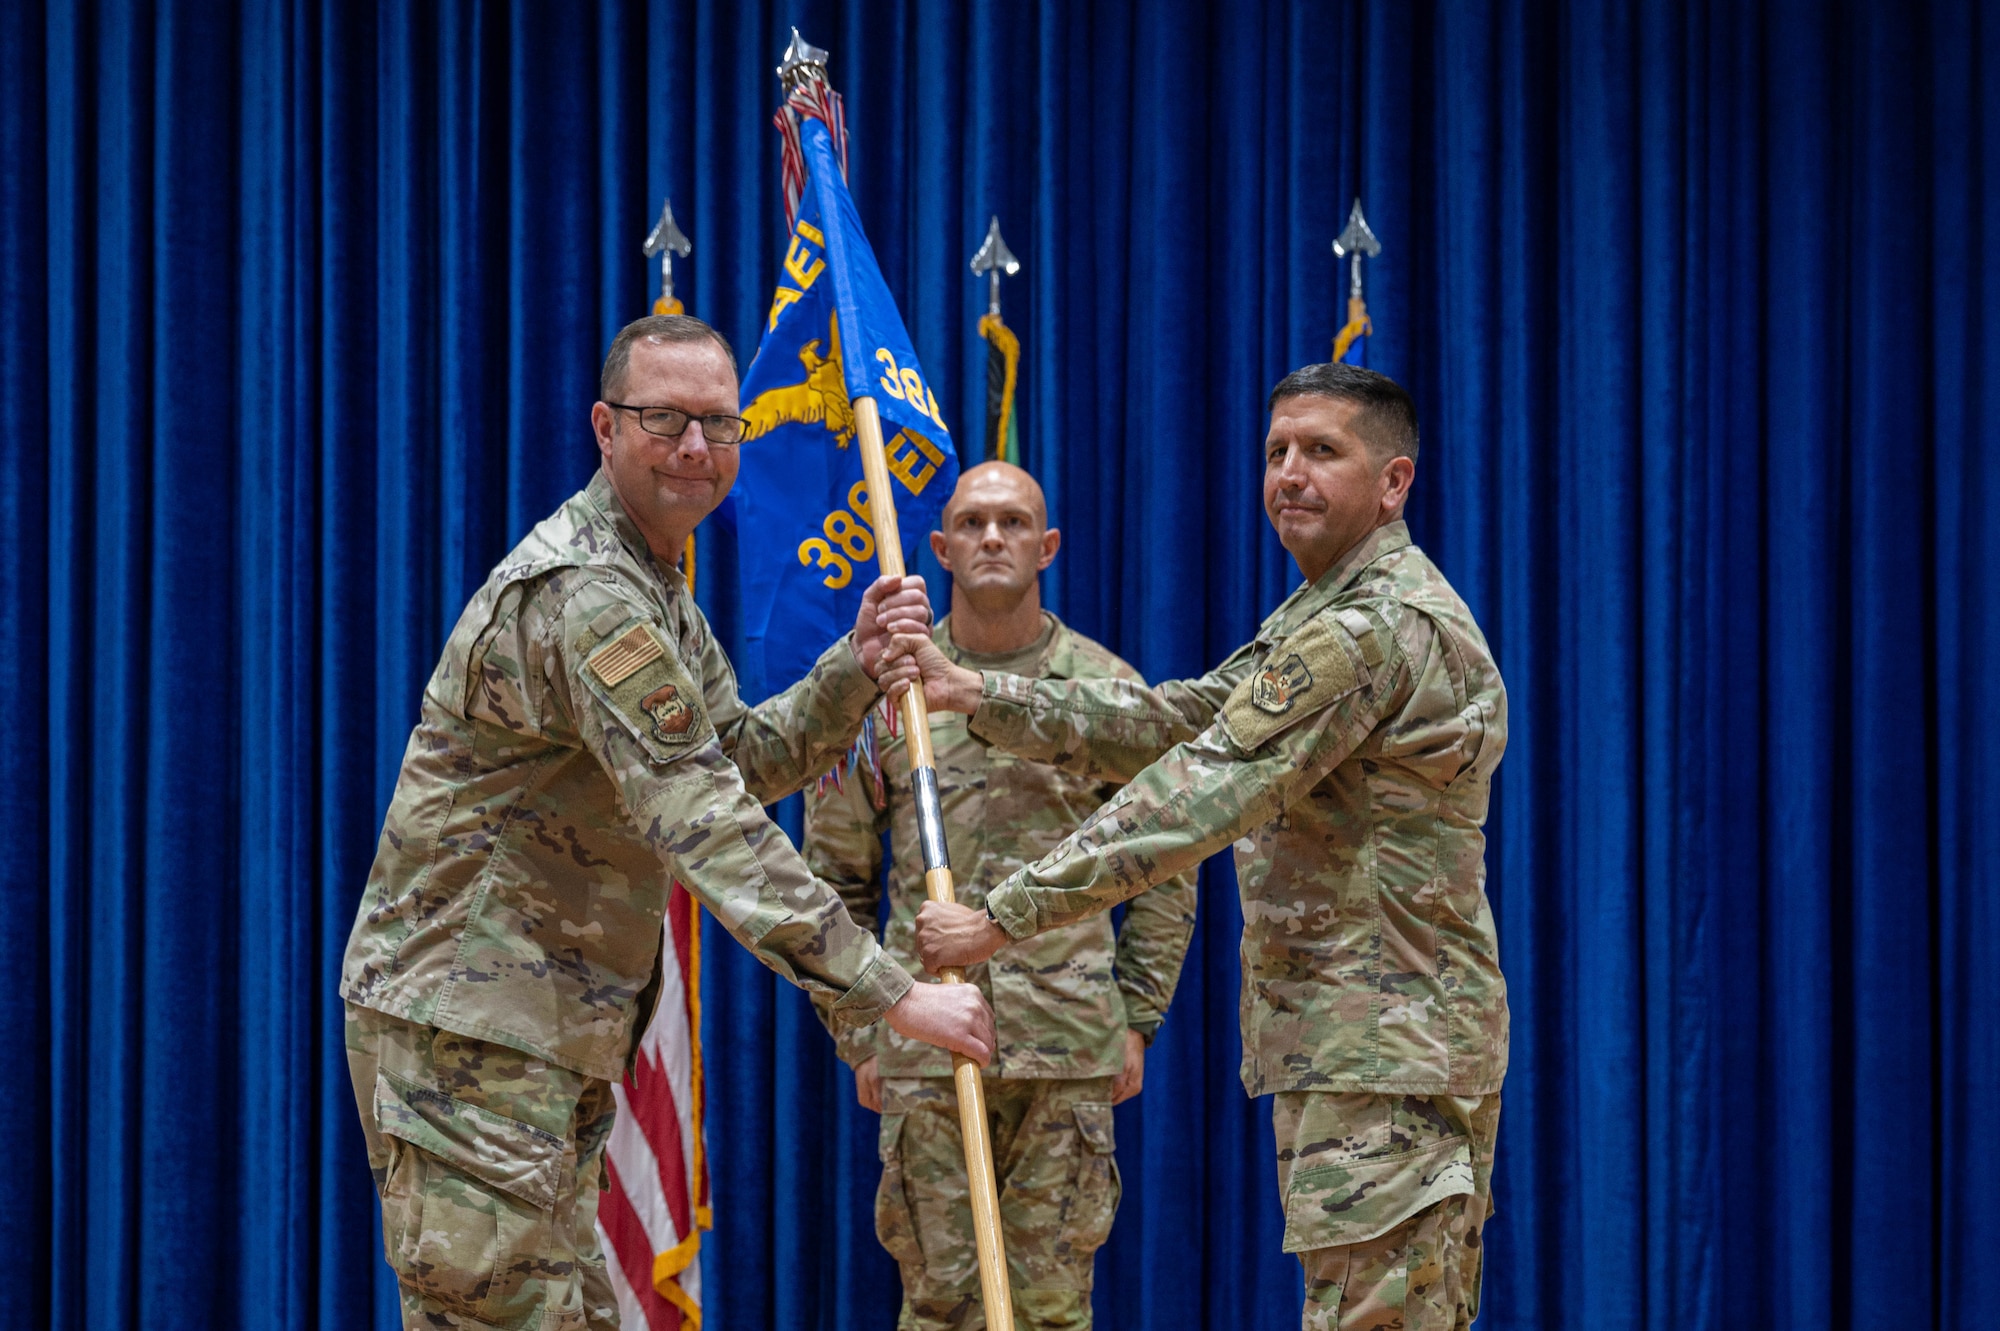 The 386th Expeditionary Mission Support Group was the third group to inactivate as the 386th Air Expeditionary Wing moves from the expeditionary group construct toward the Air Staff model. Col. John Gustafson led over 3,600 Total Force Airmen across three deployment rotations at three operating locations and guided U.S. Central Command’s busiest aerial port, moving over 80,000 passengers and nearly 60,000 tons of cargo.